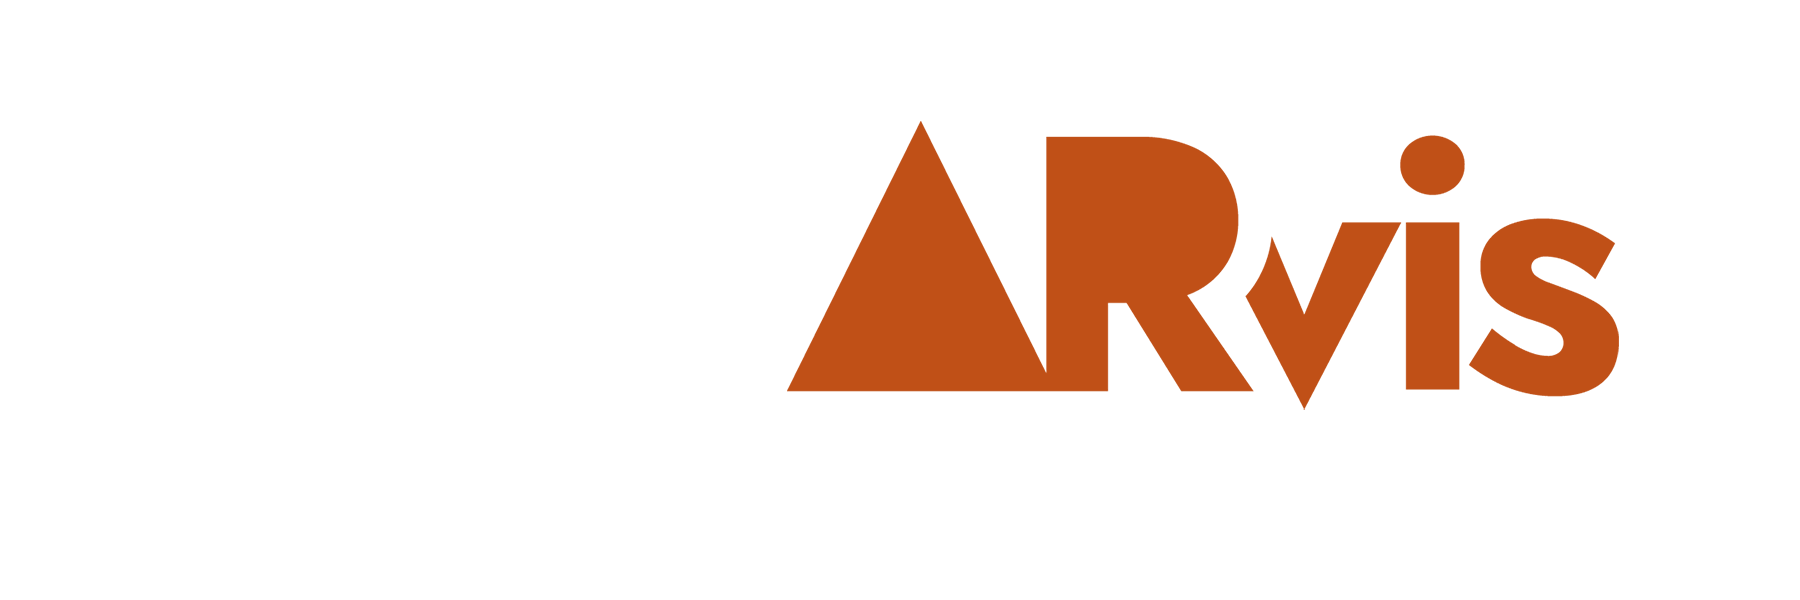 ecommerce division